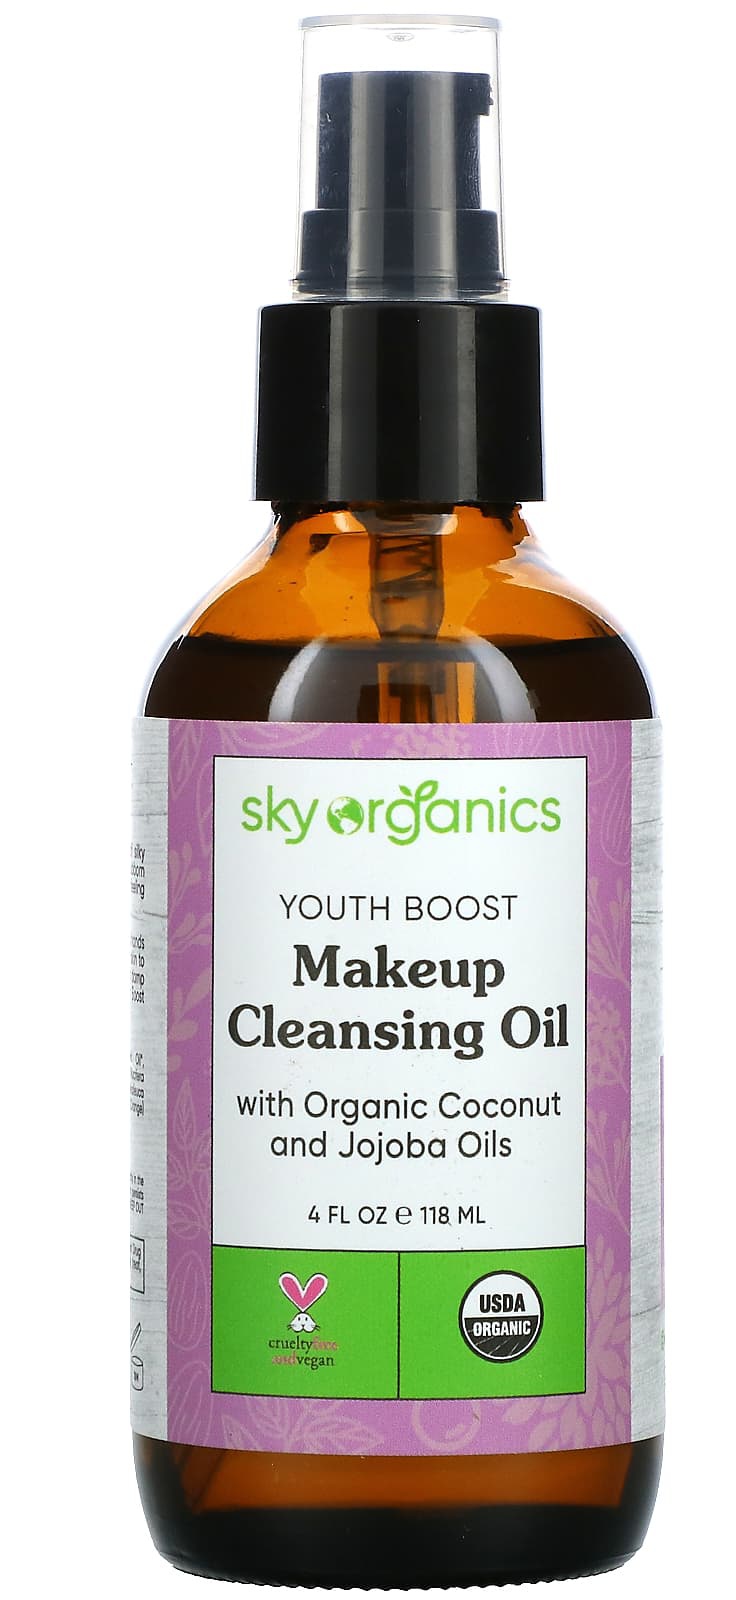 Sky Organics Youth Boost Makeup Cleansing Oil